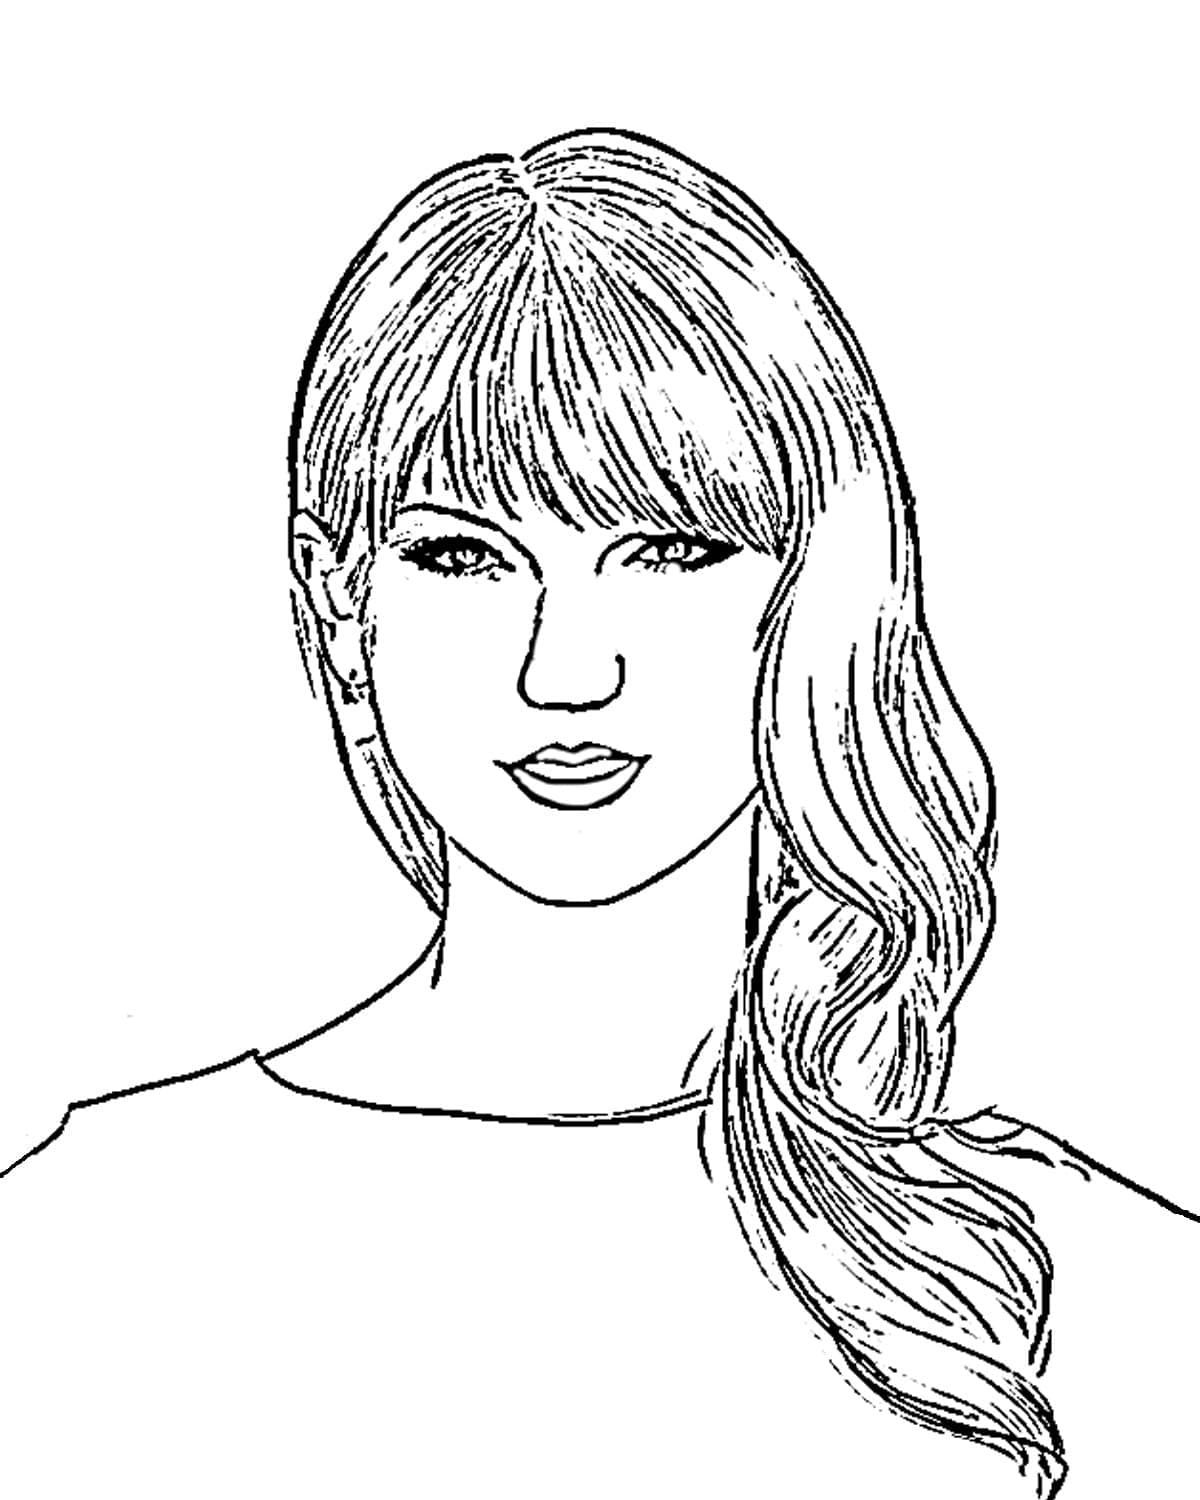 How To Draw Taylor Swift | Pencil Drawing - YouTube